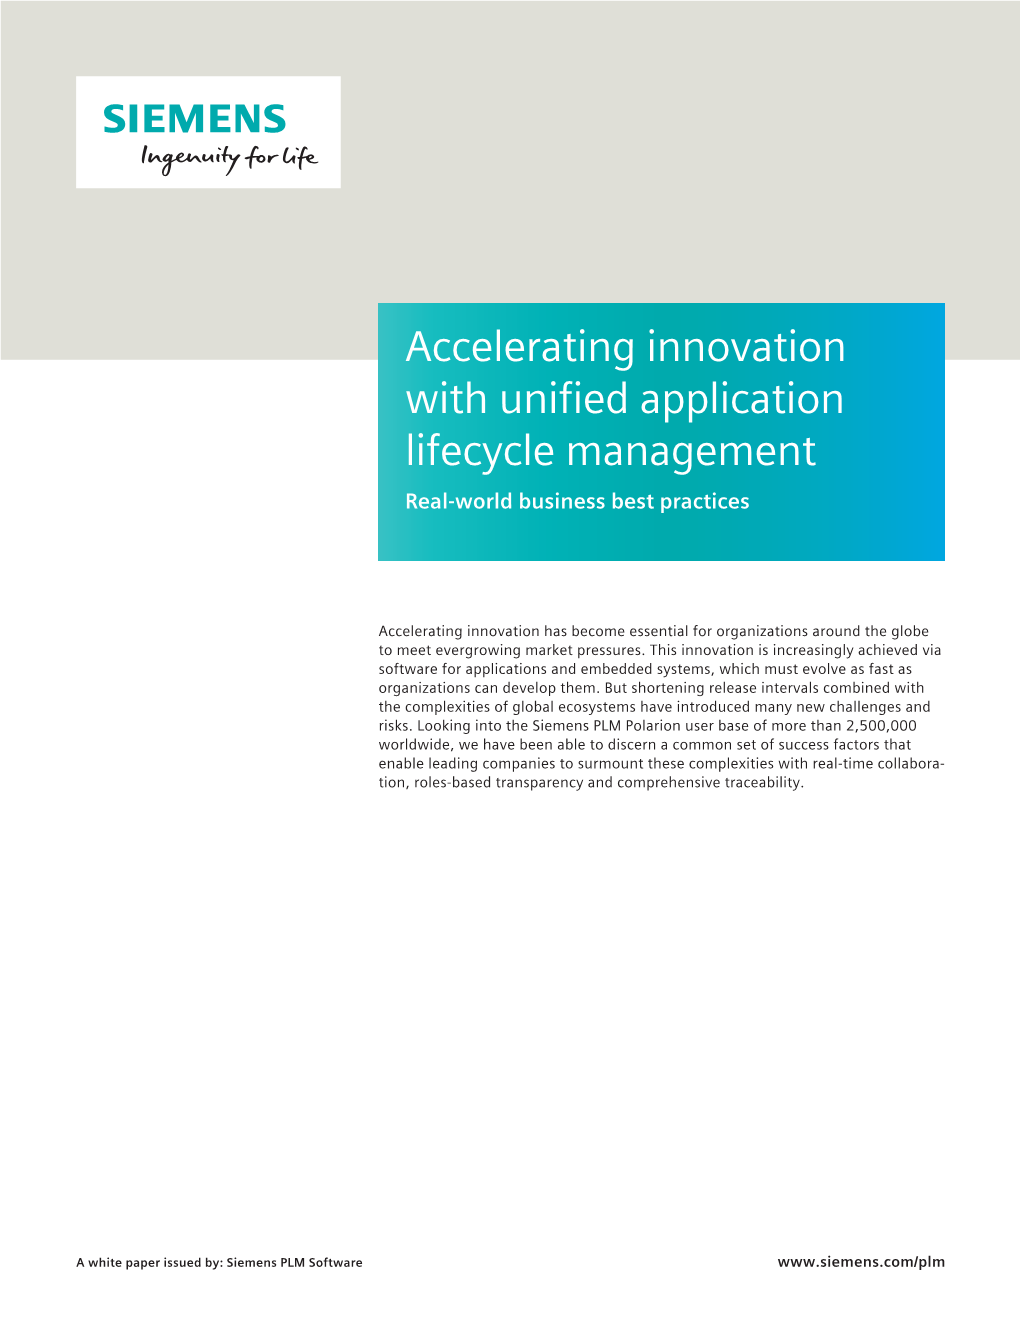 Accelerating Innovation with Unified Application Lifecycle Management Real-World Business Best Practices